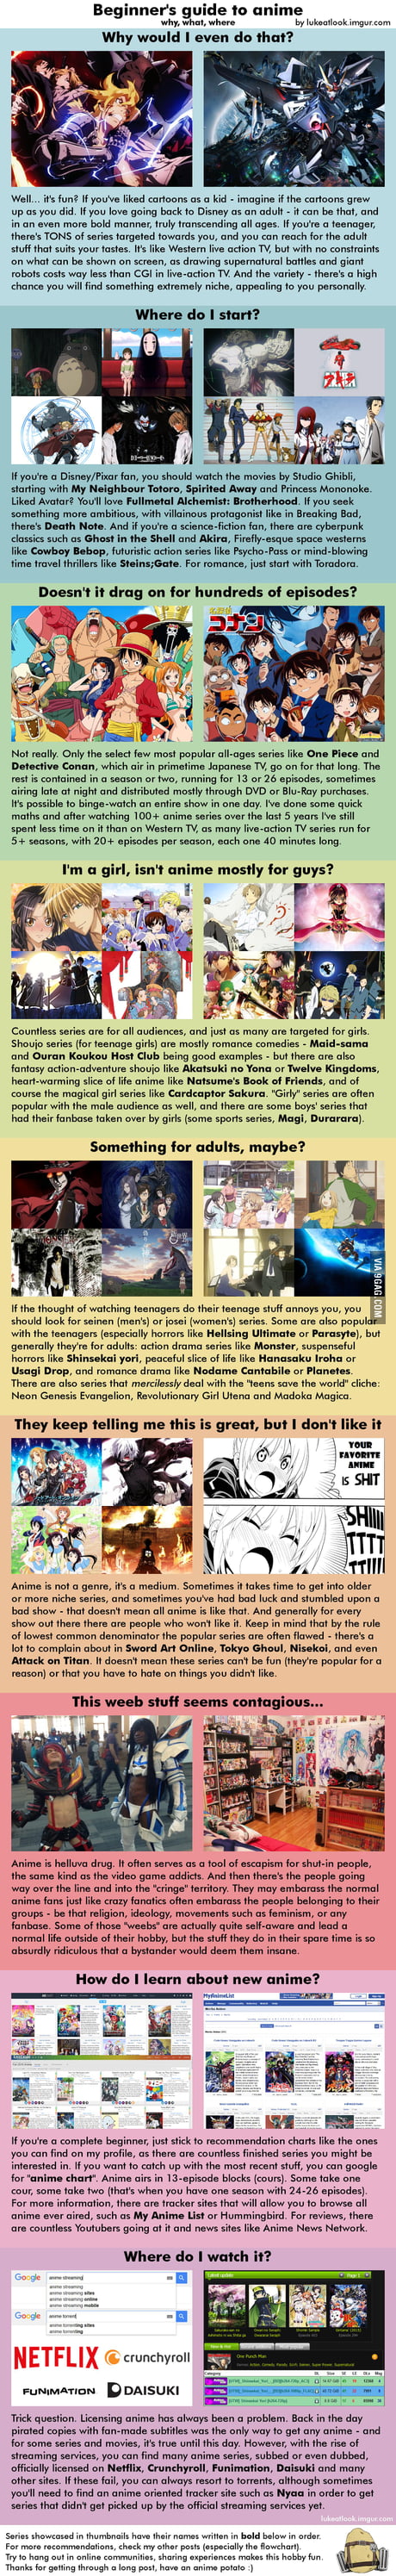 Beginner's Guide To Anime (why, what, where) - 9GAG